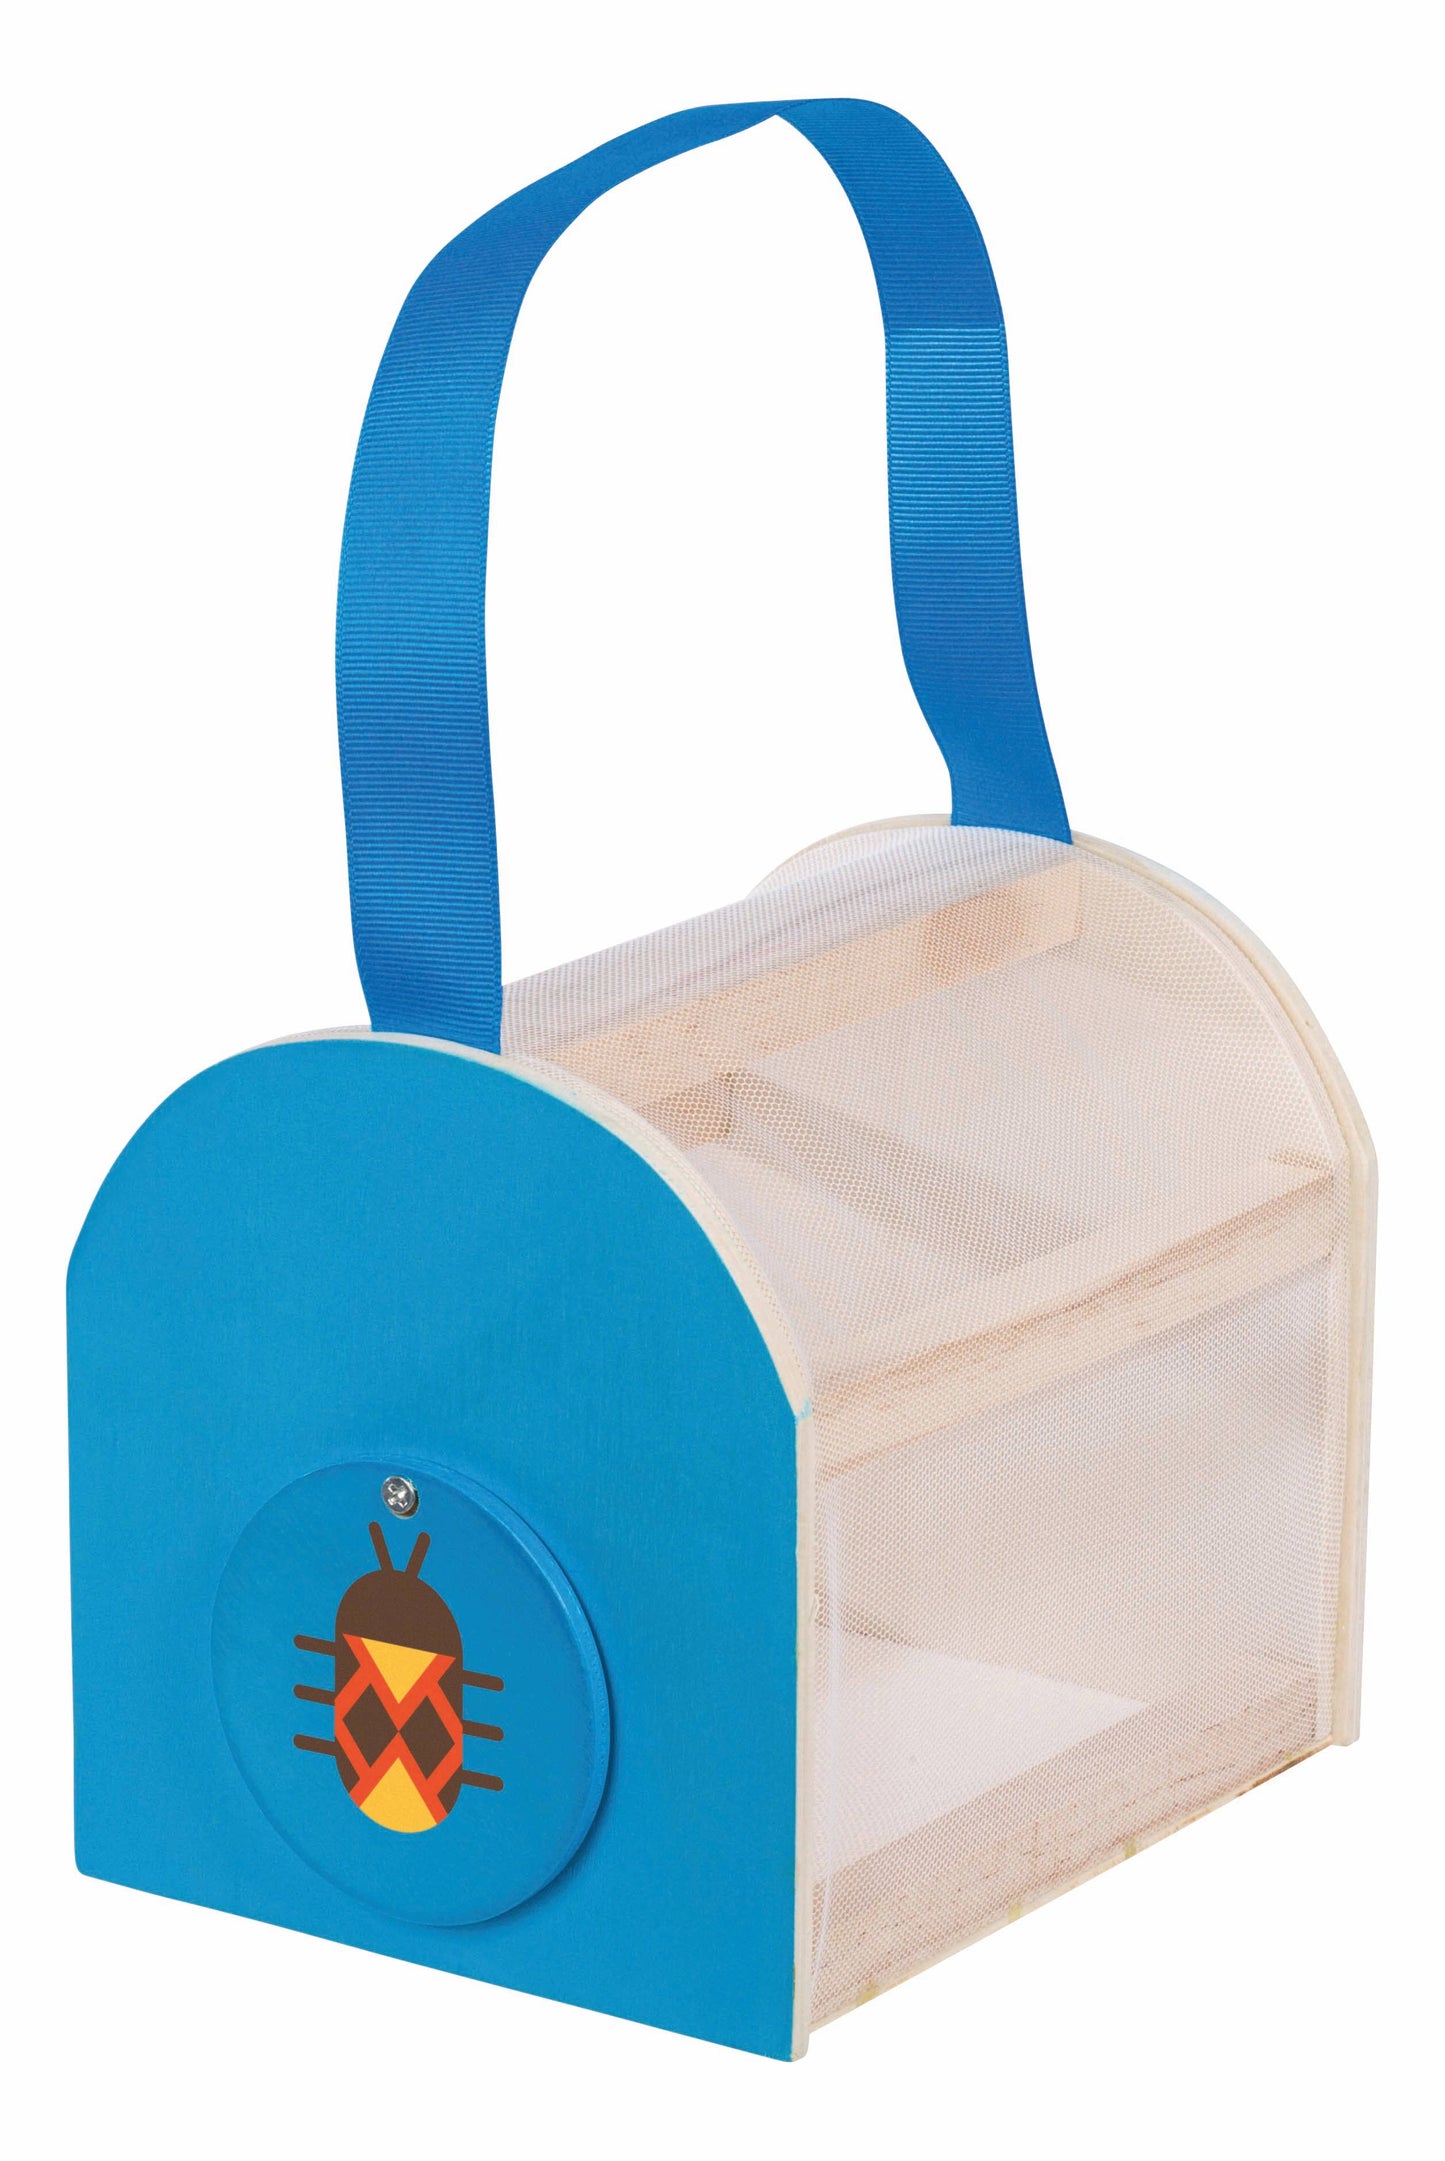 Toysmith - Beetle & Bee Critter Case FSC Certified Wood-Outdoor Play